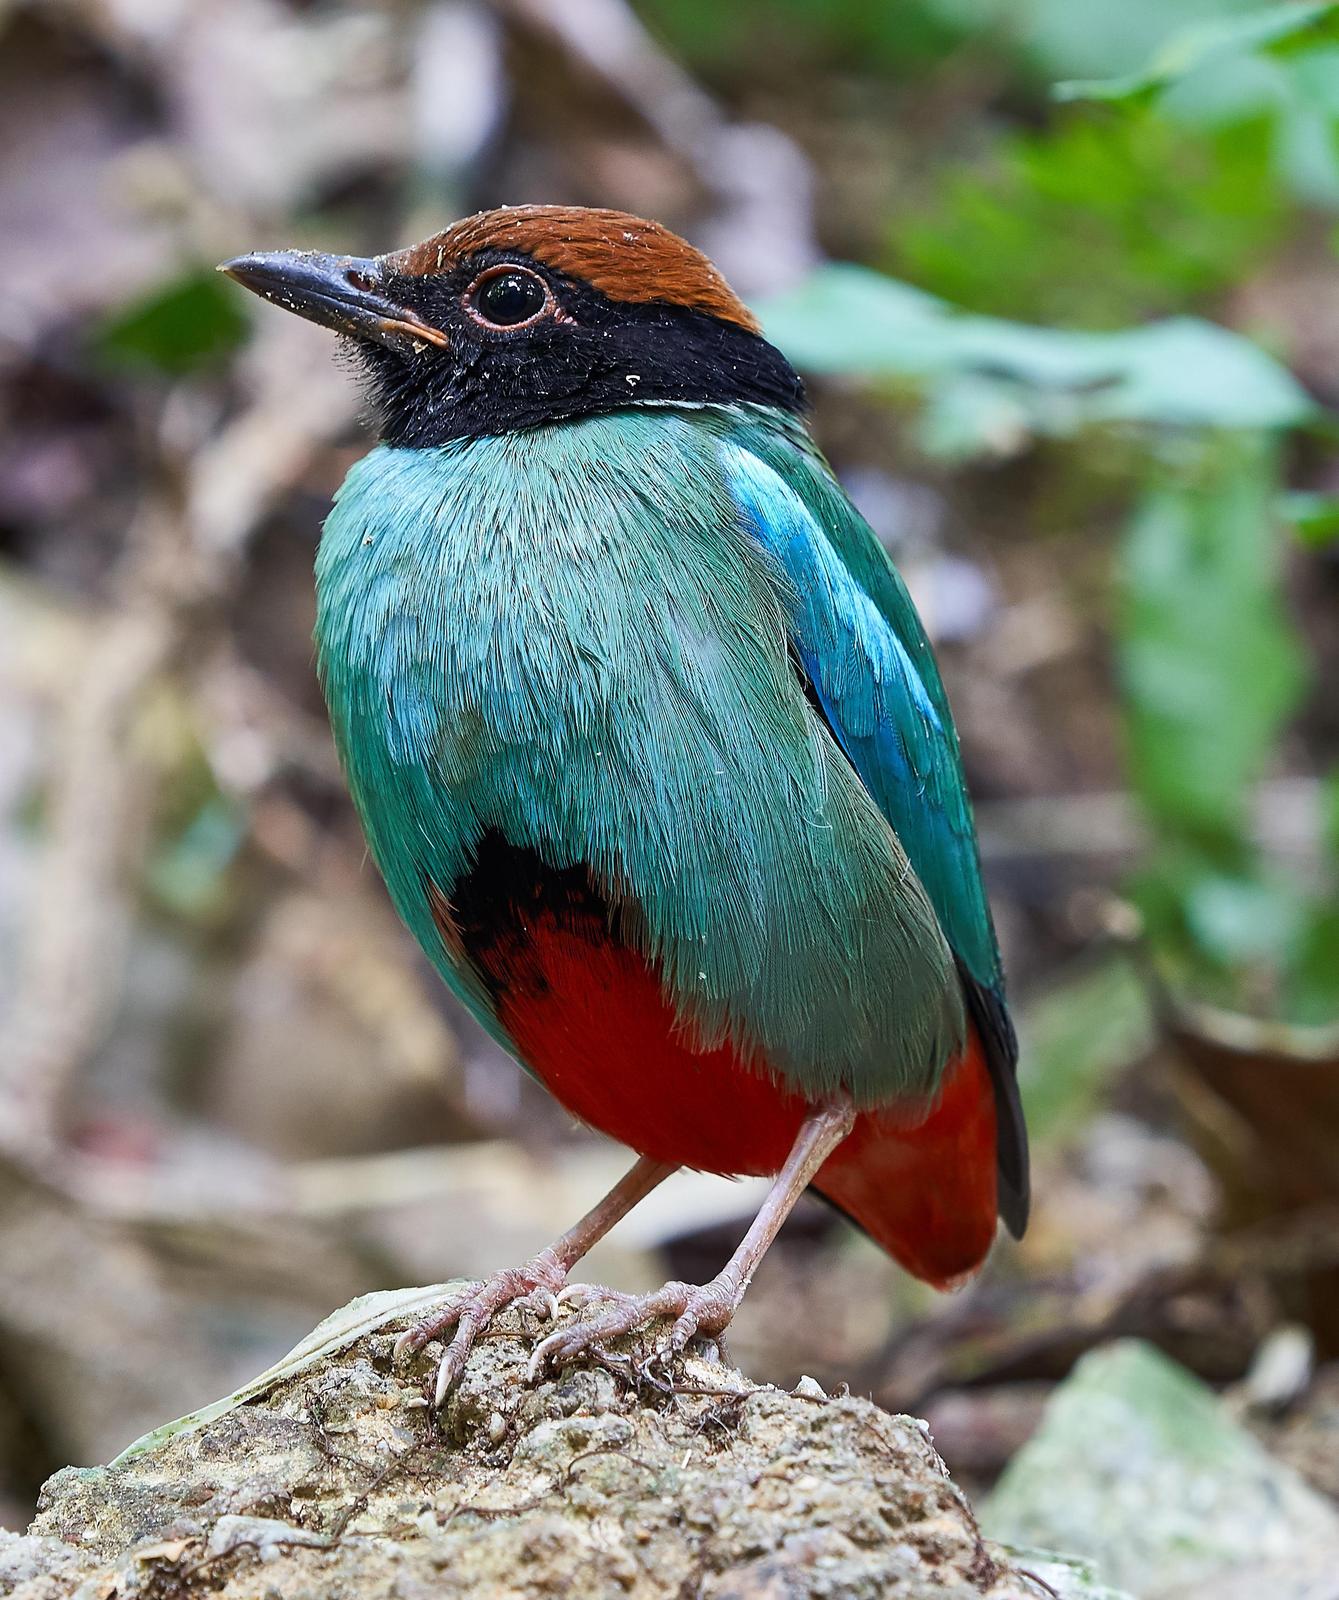 Hooded Pitta Photo by Steven Cheong